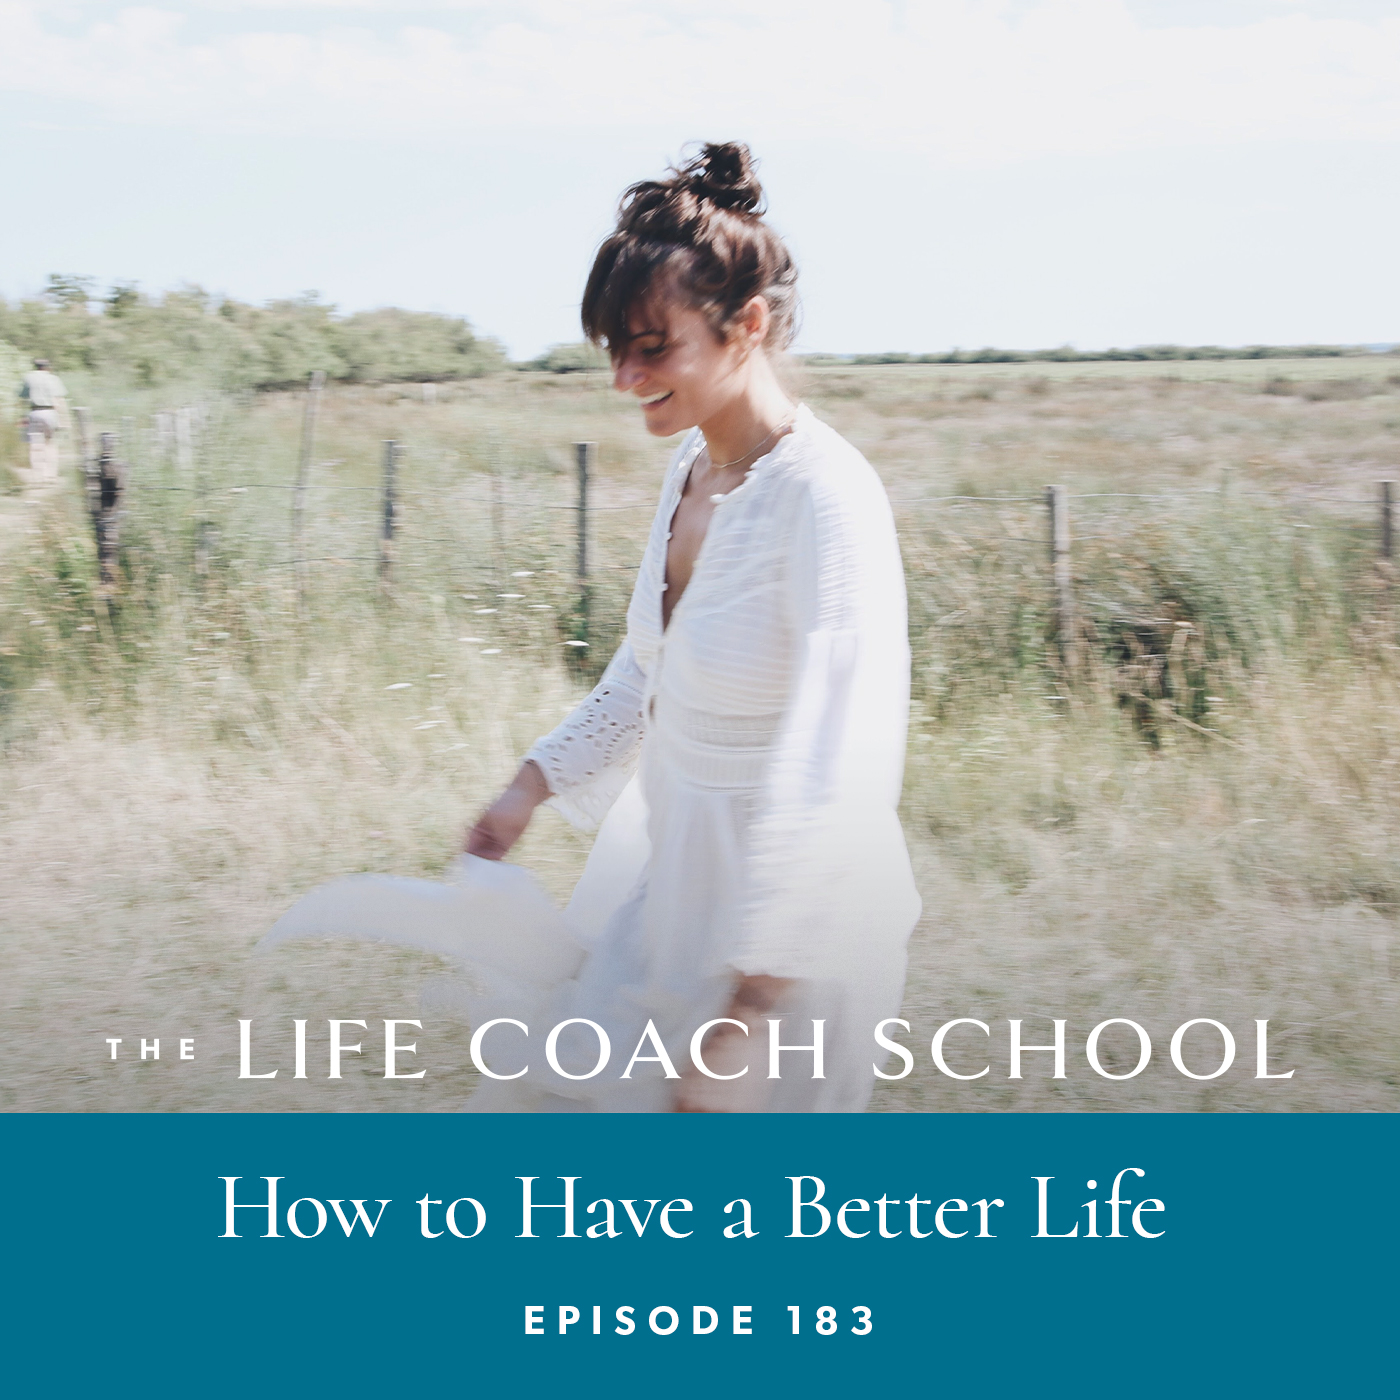 The Life Coach School Podcast with Brooke Castillo | Episode 183 | How to Have a Better Life